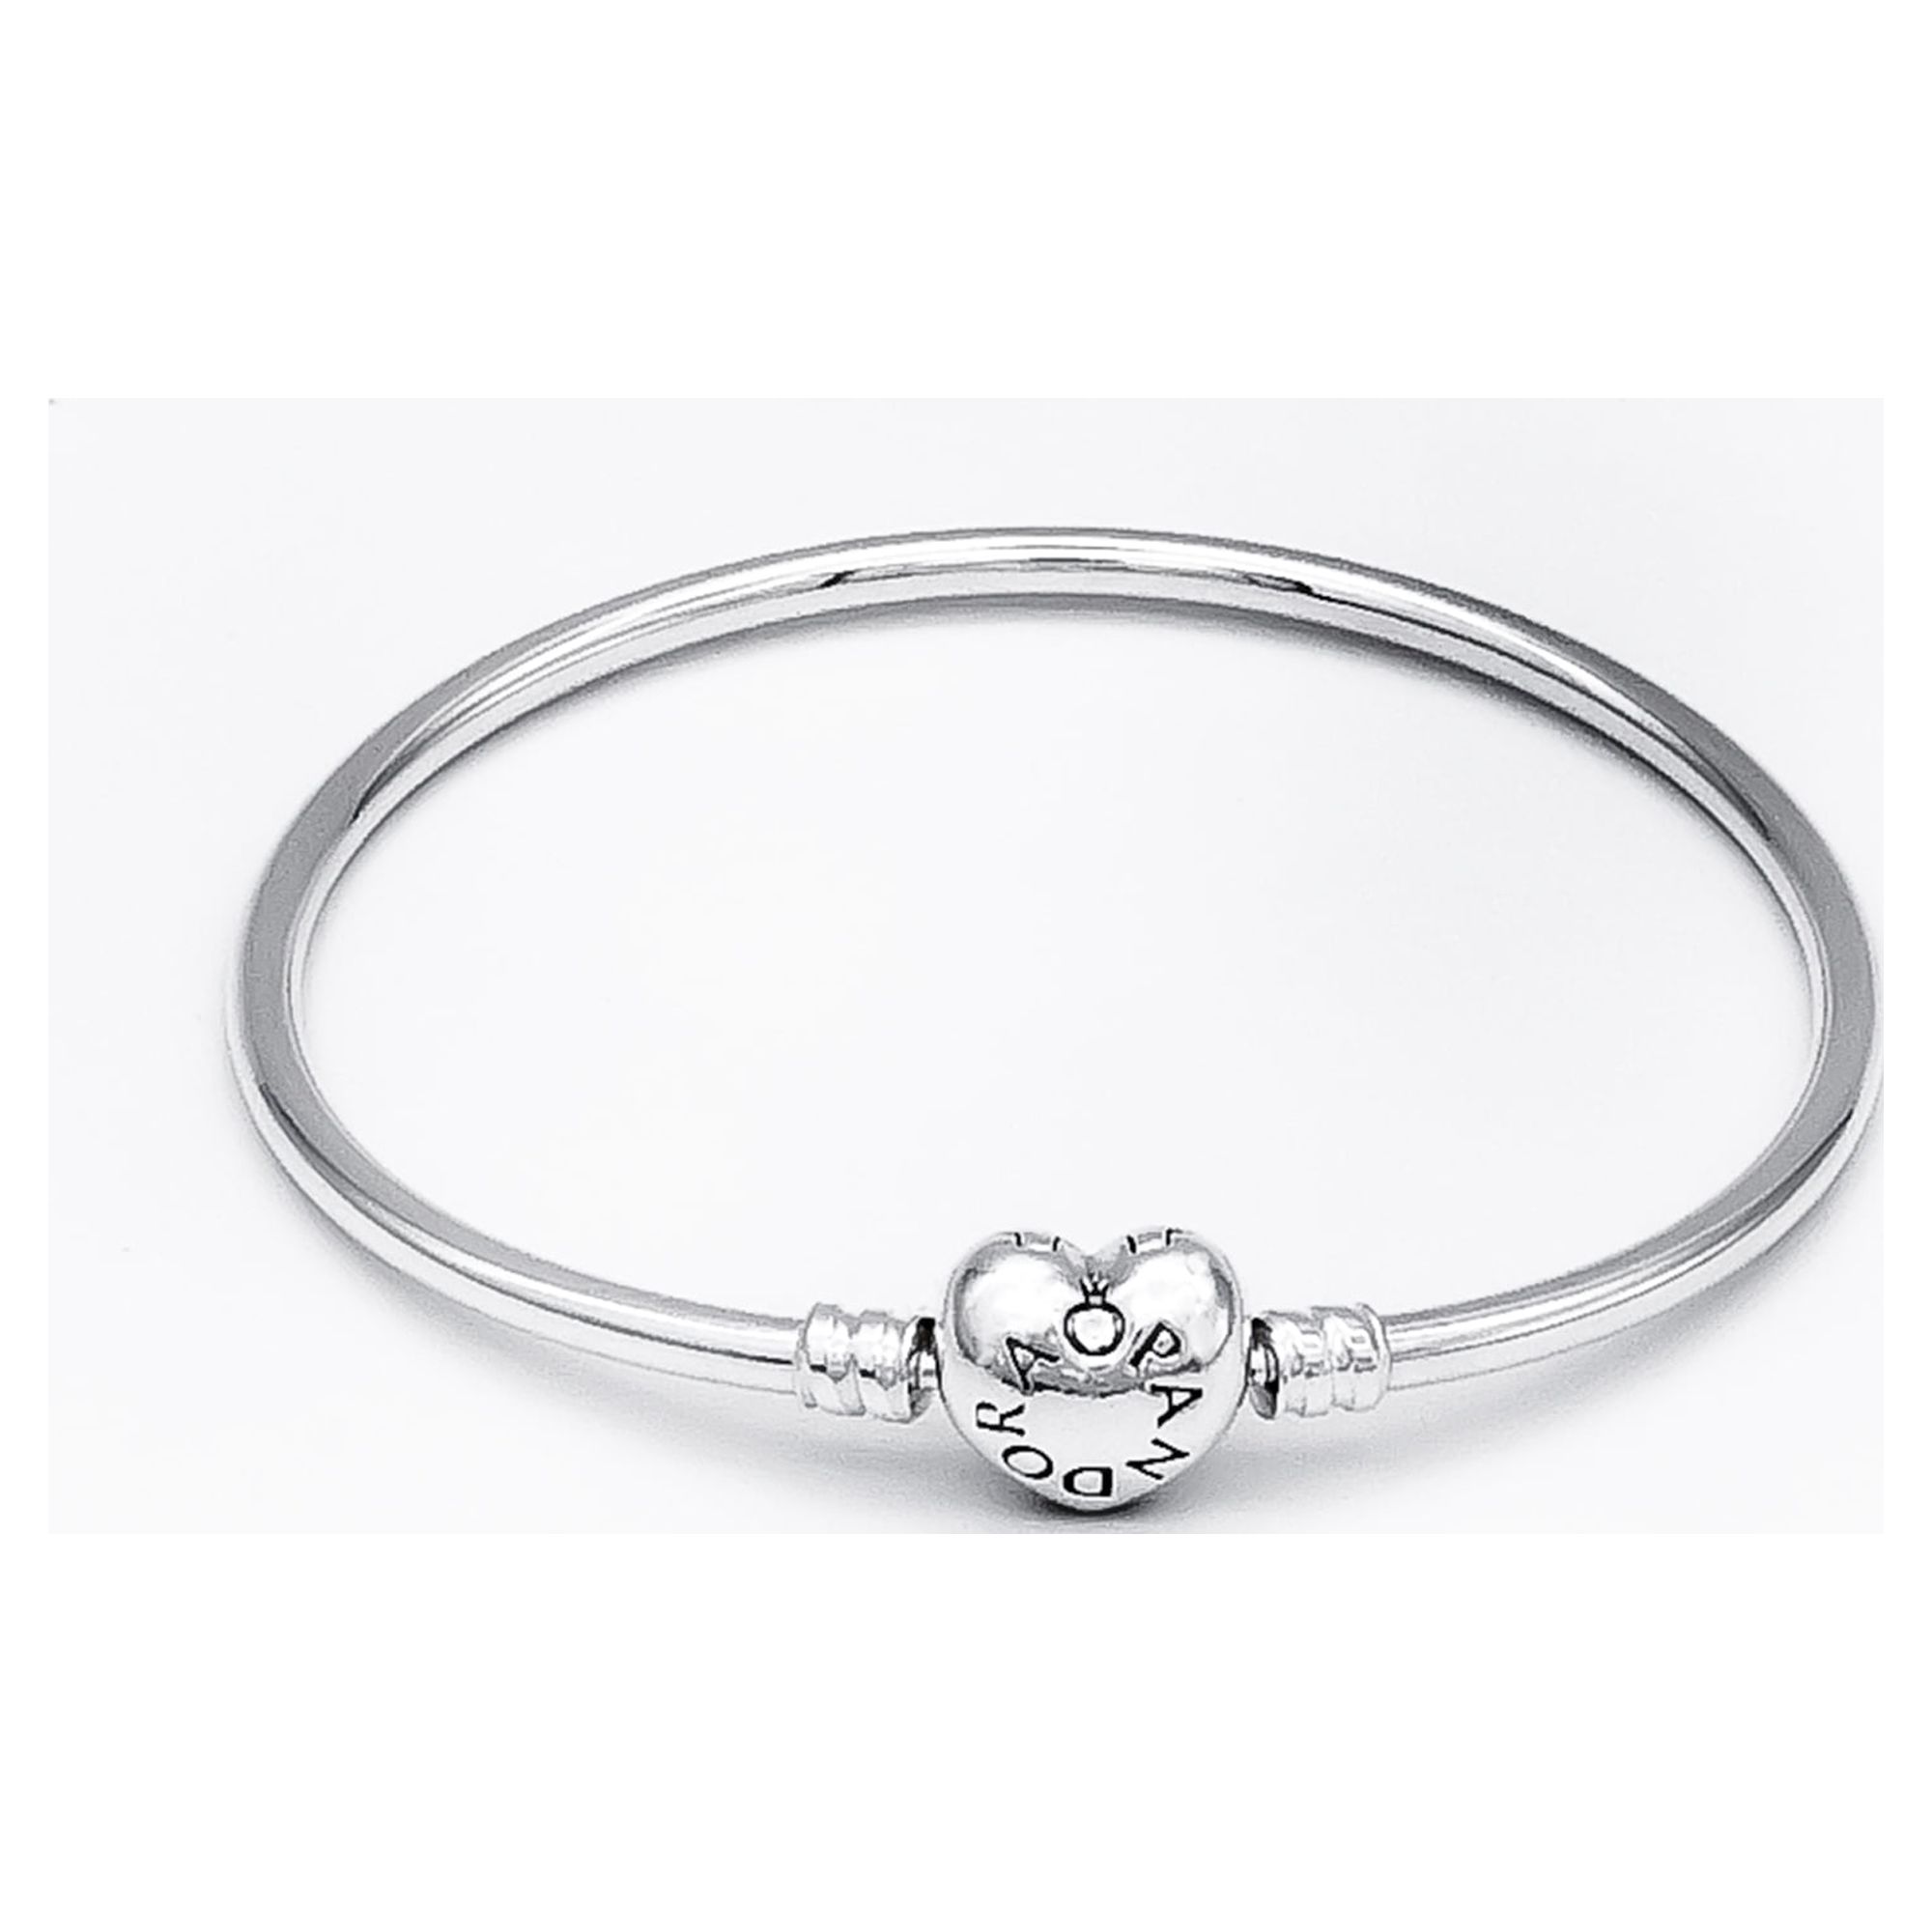 Pandora Moments Sterling Silver Bangle with Heart Clasp - image 2 of 2